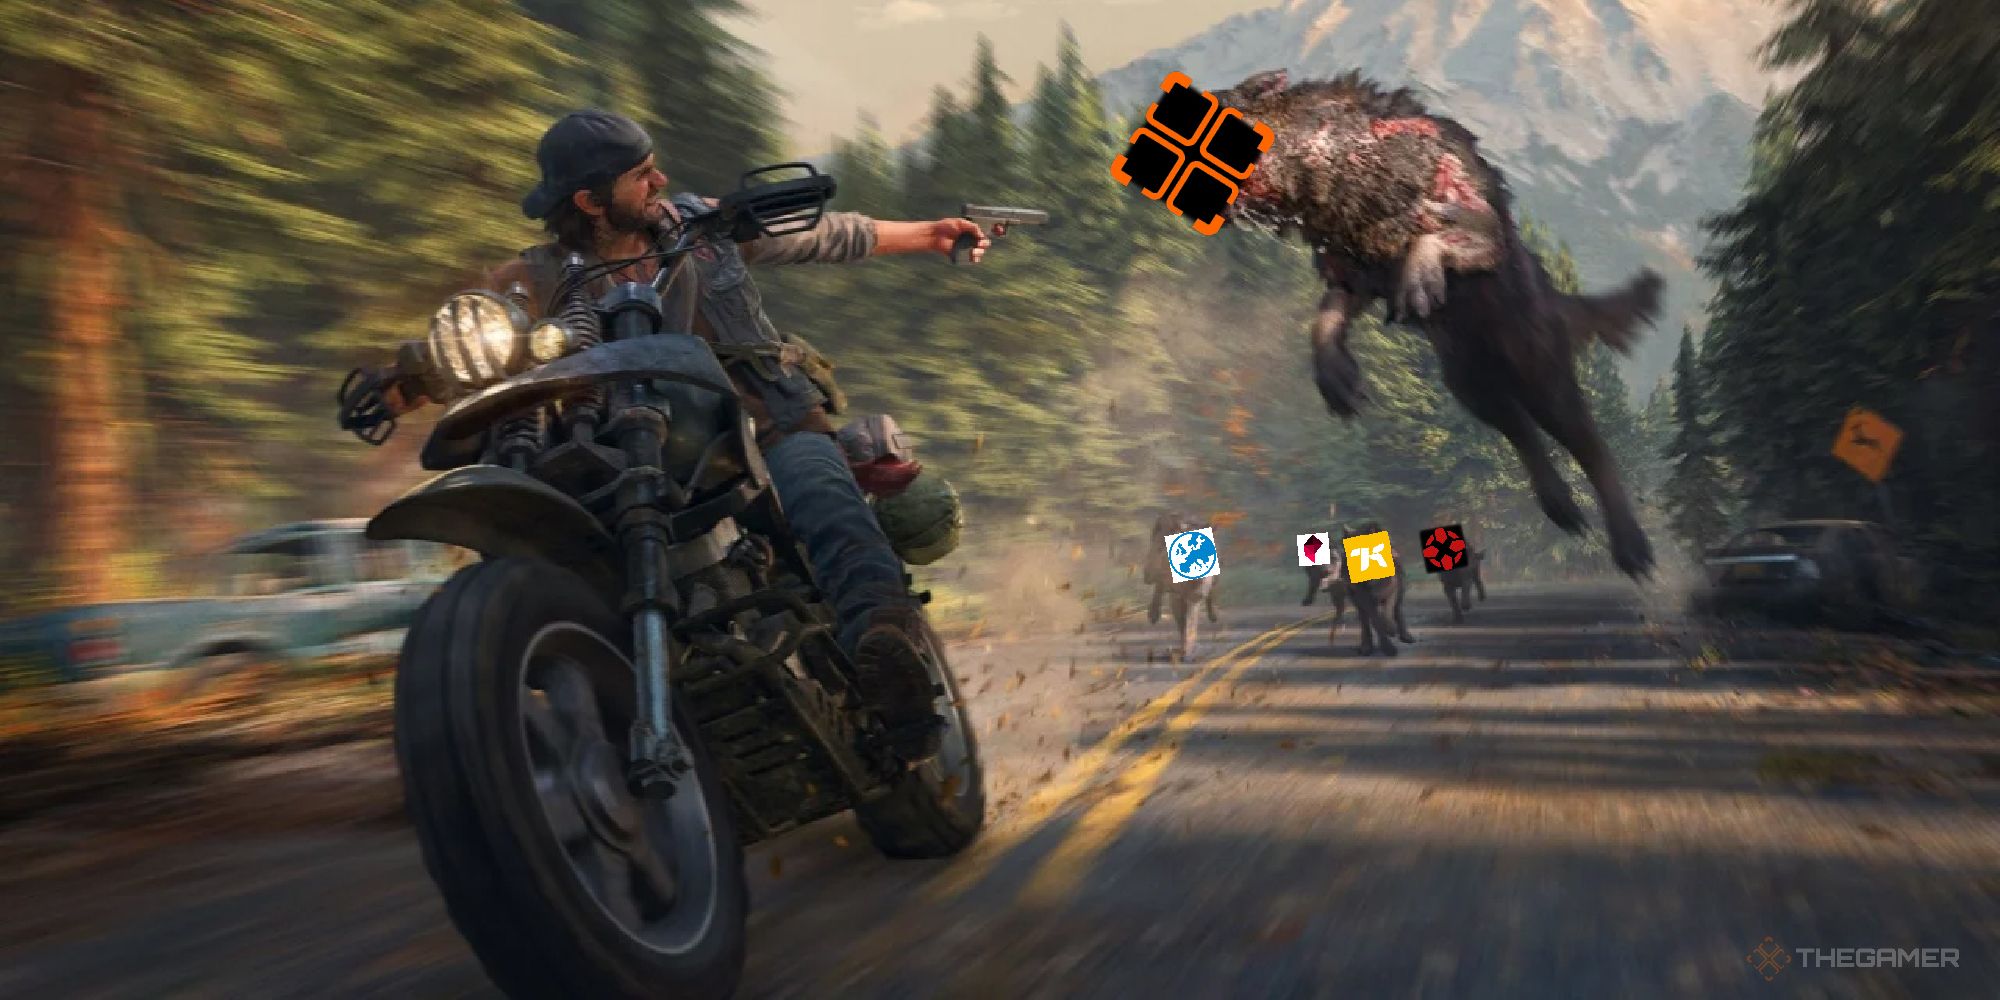 Days Gone being chased by gaming websites